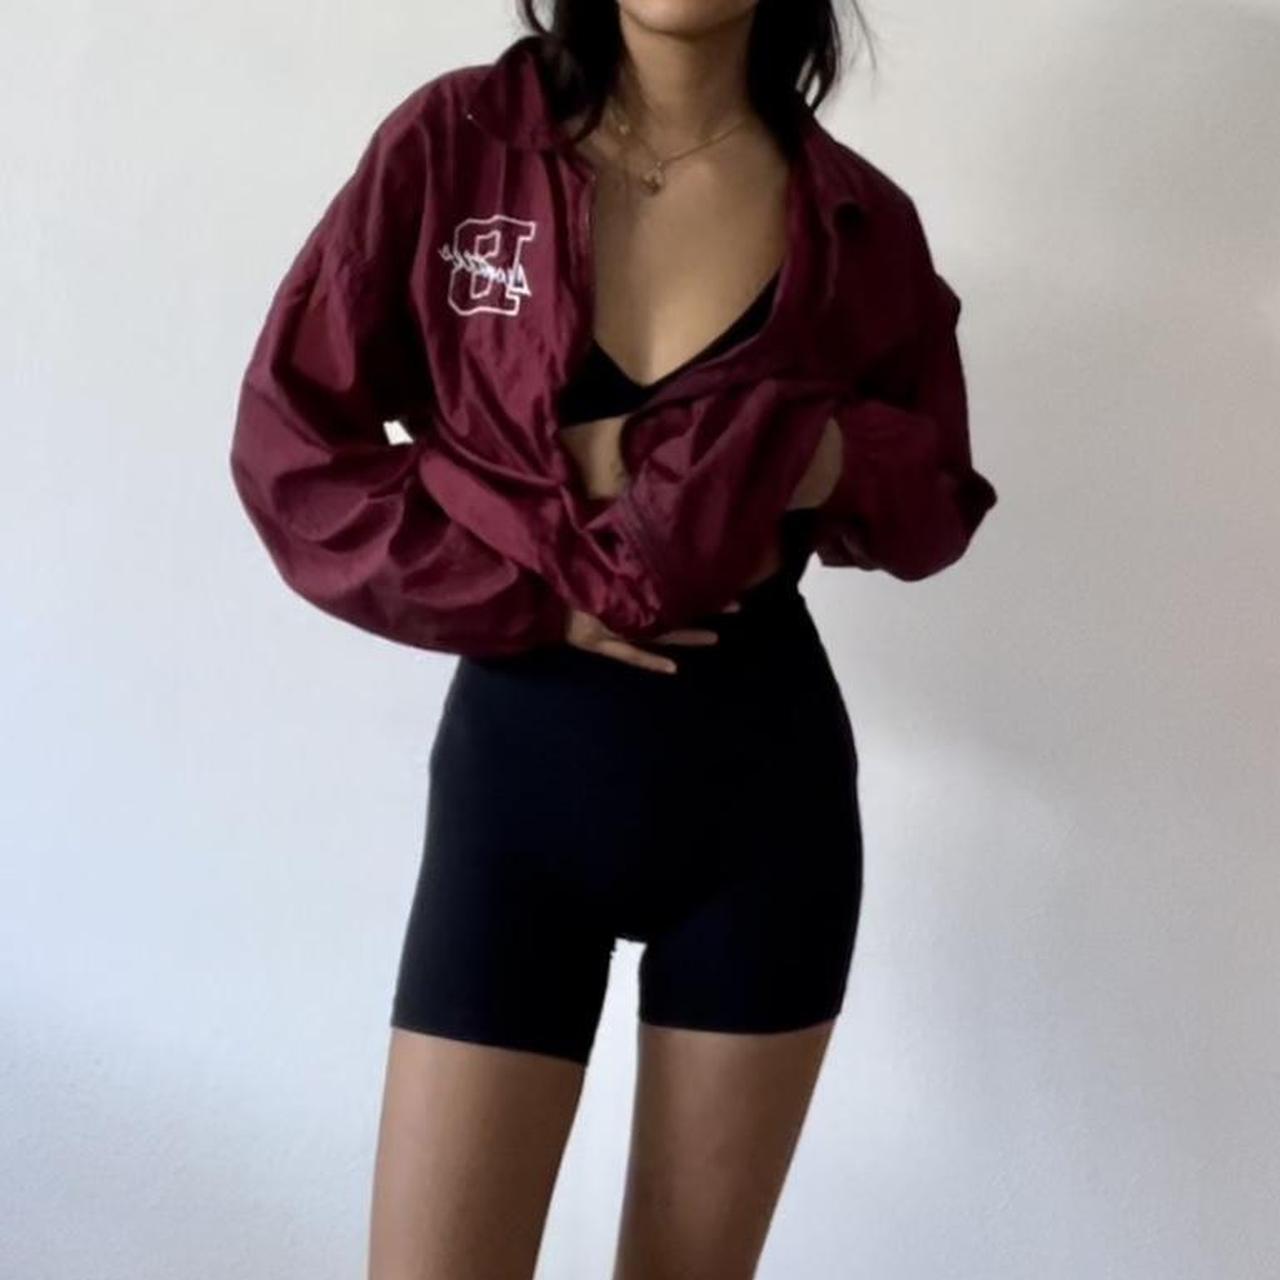 Product Image 2 - Vintage Maroon Windbreaker

Bought this at